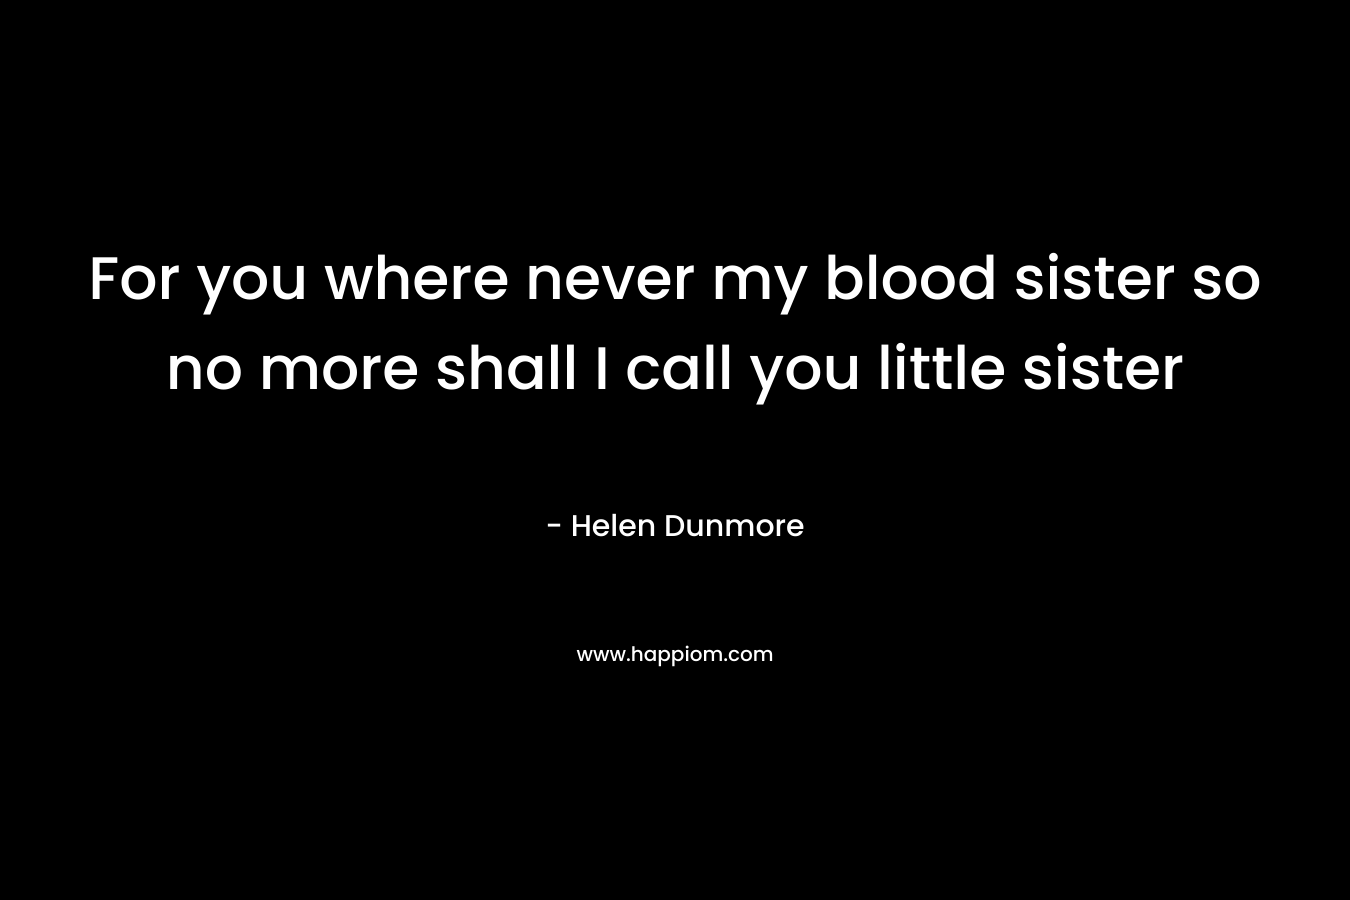 For you where never my blood sister so no more shall I call you little sister